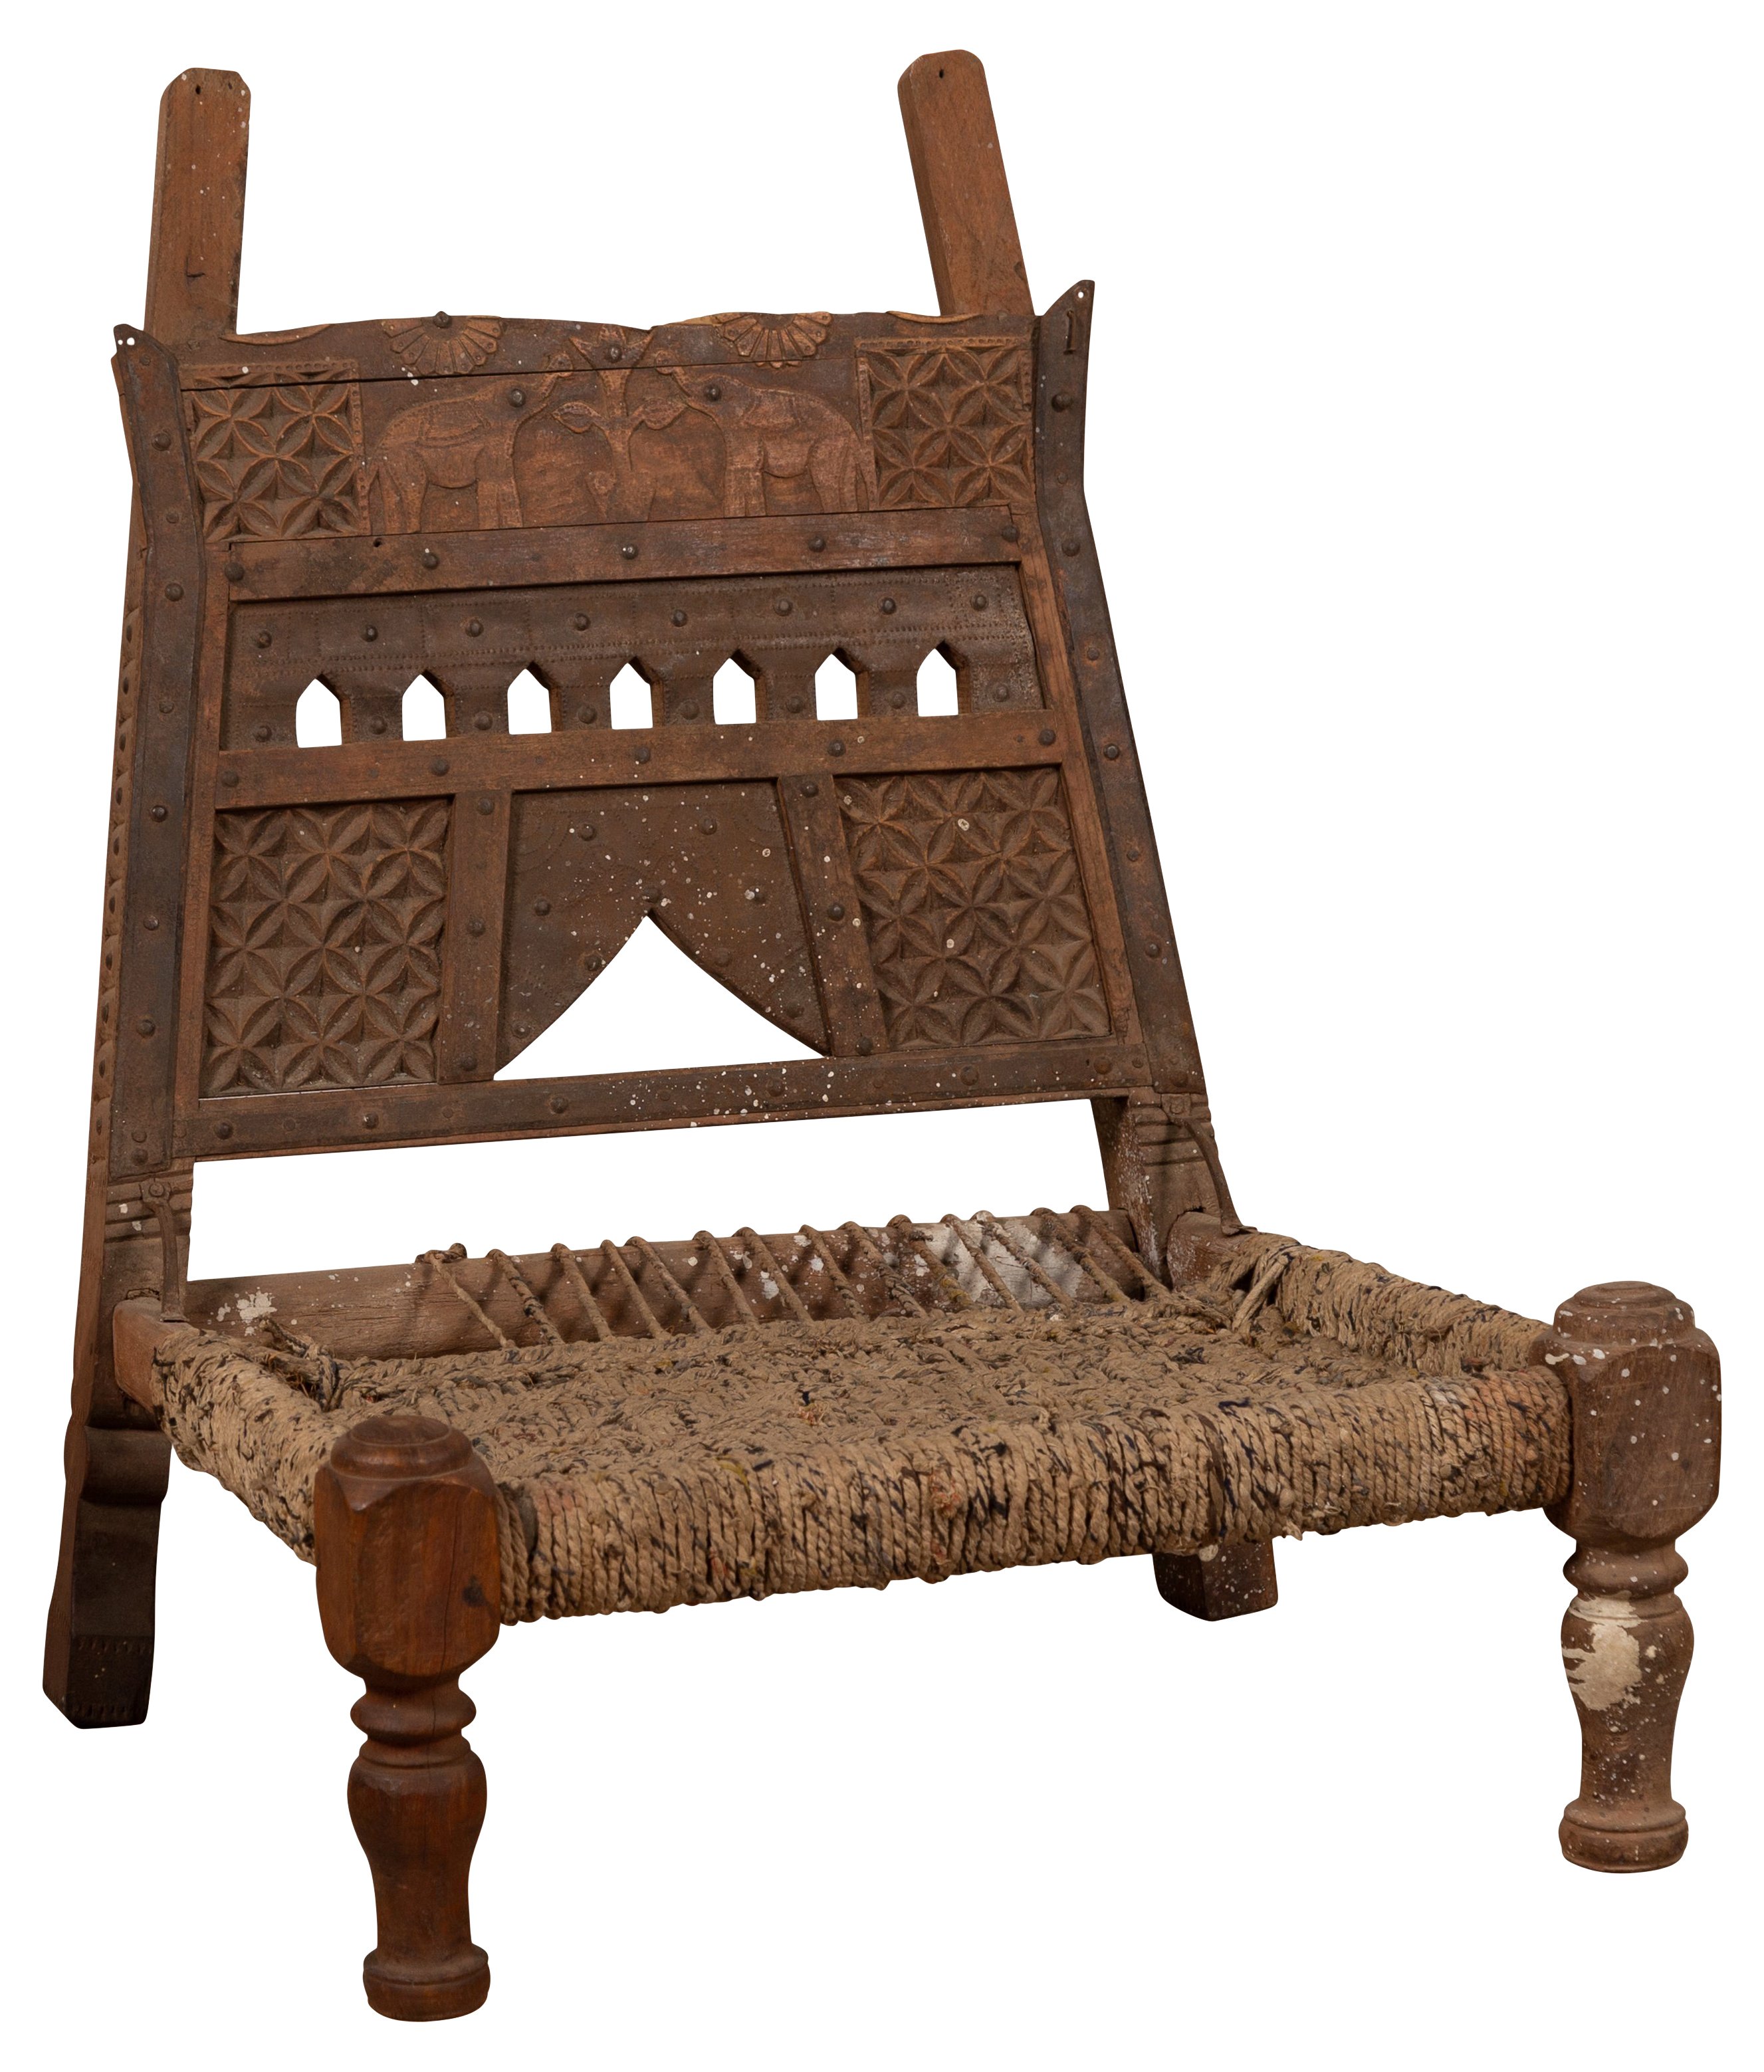 Rustic Indian Low Wooden Chair with Rope~P77555503